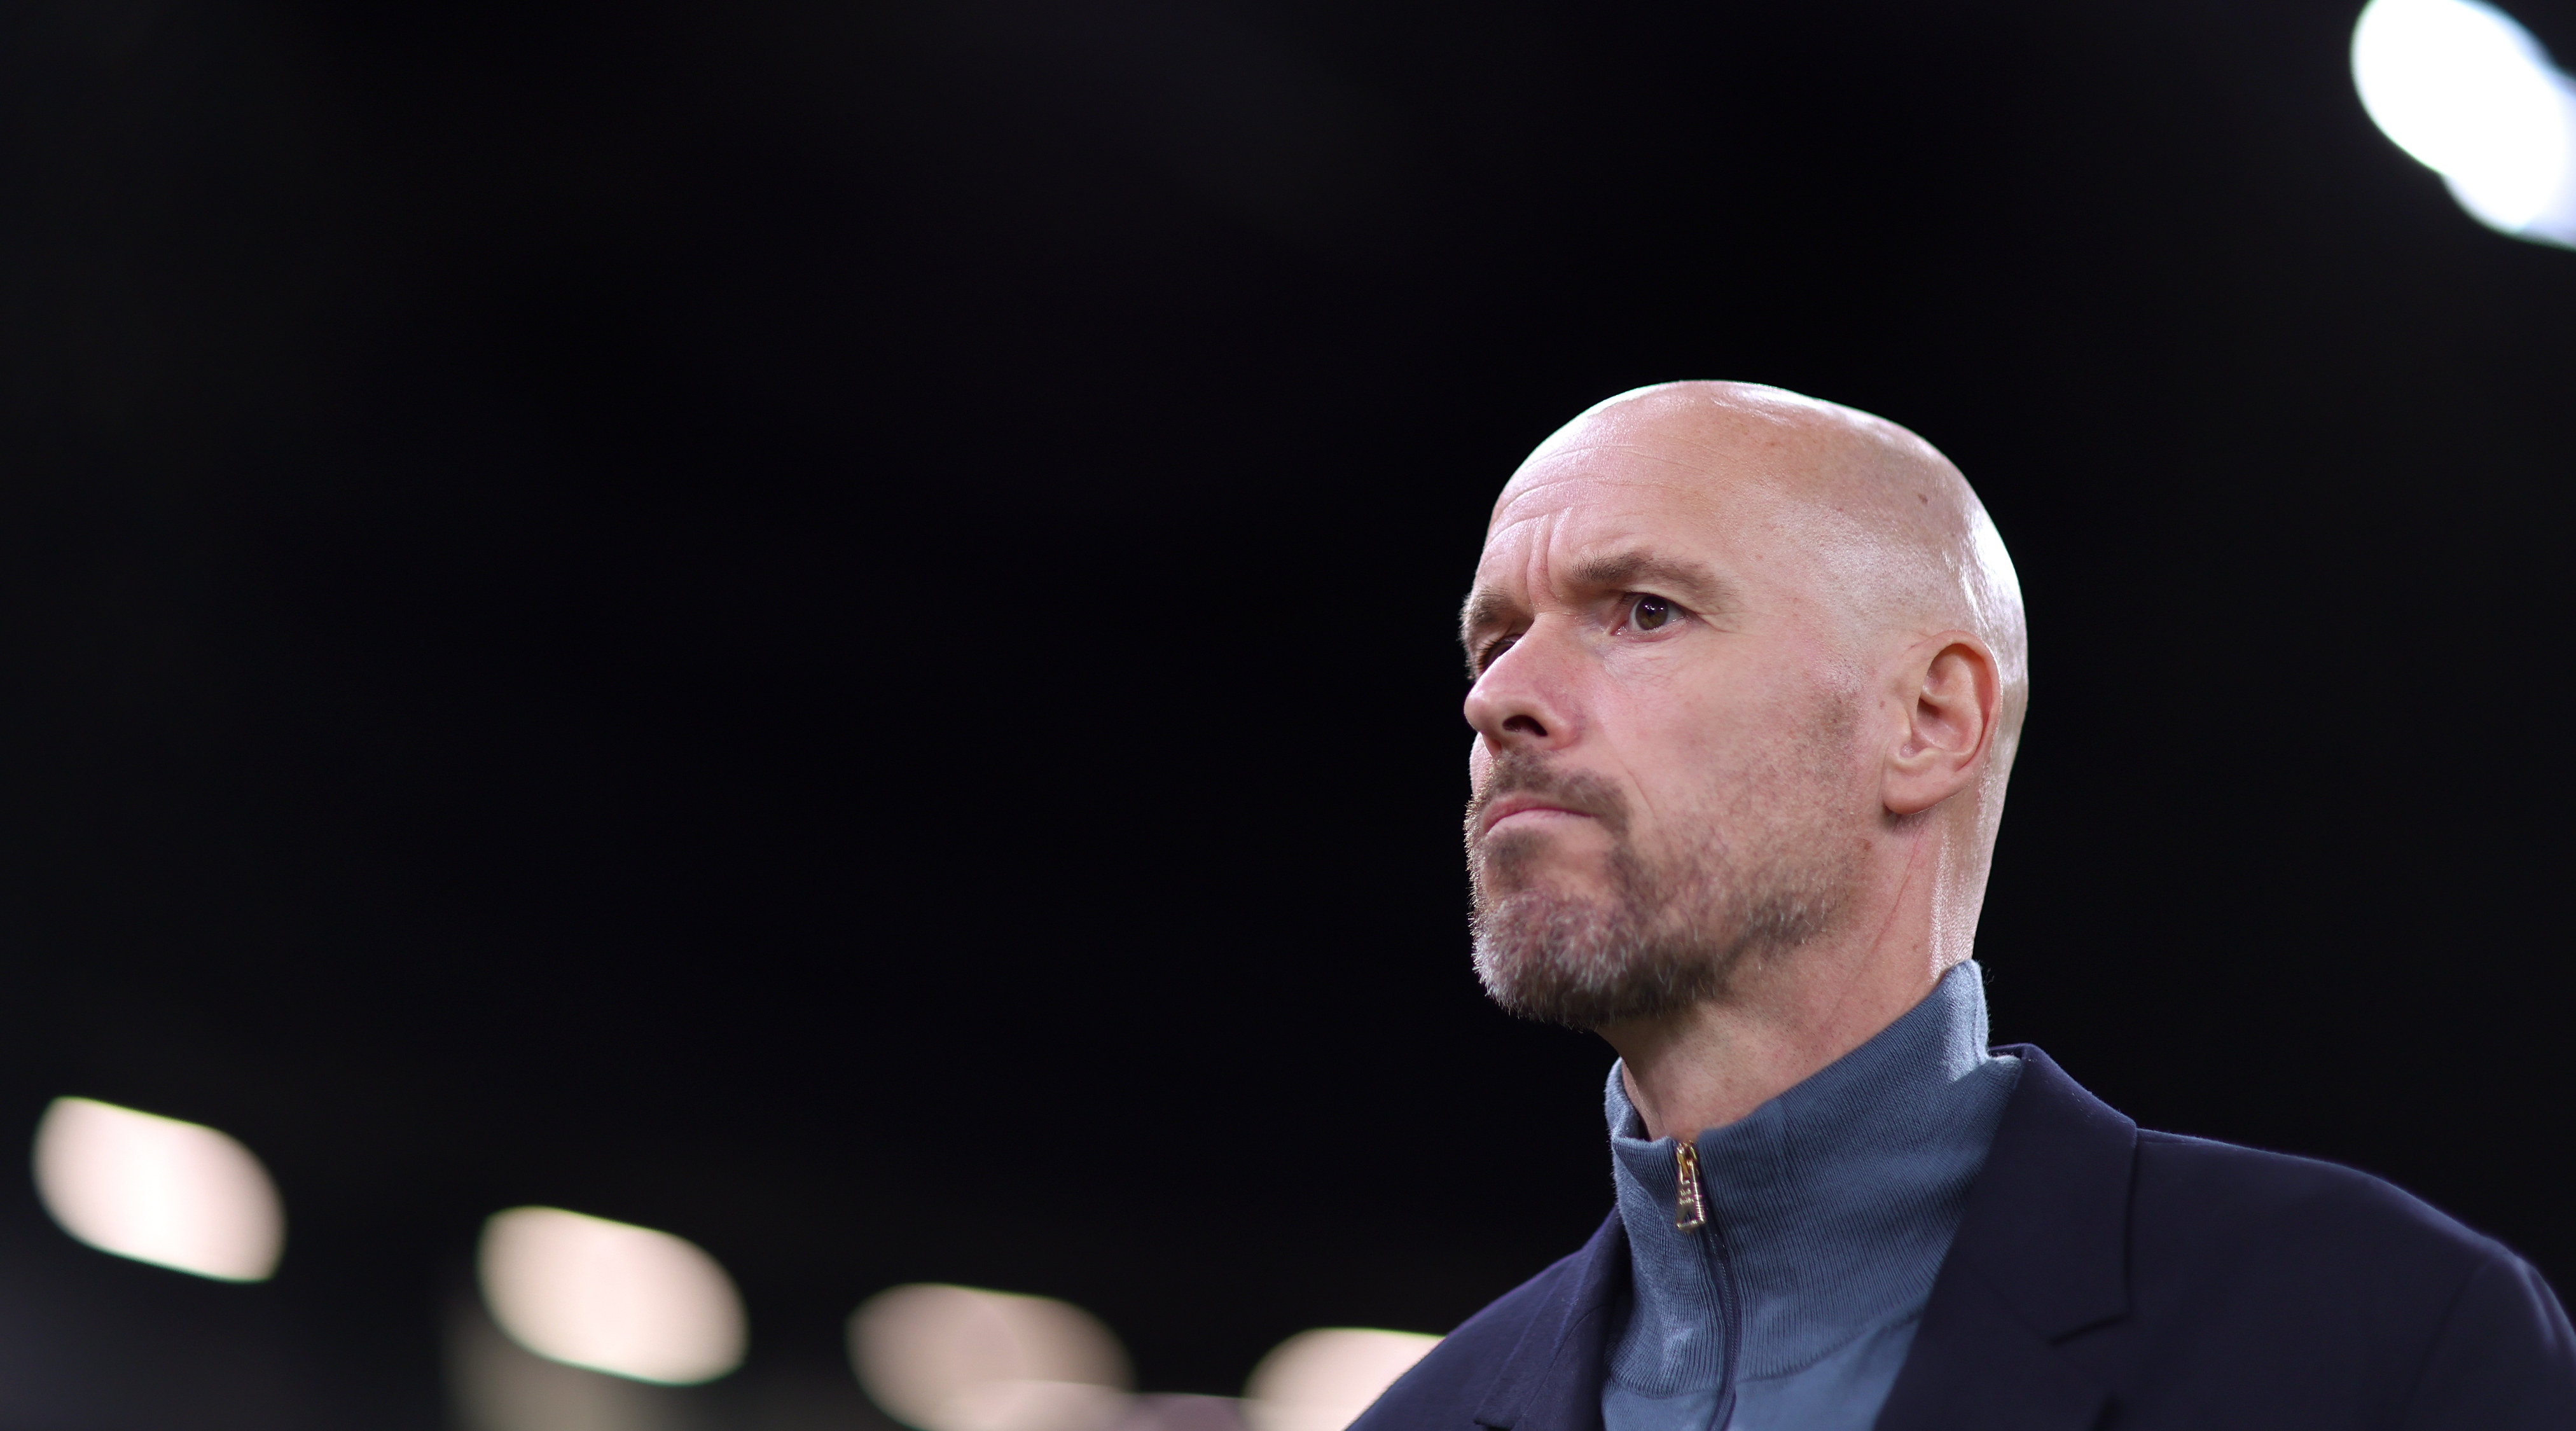 Manchester United manager Erik ten Hag looks on prior to the UEFA Europa League match between Manchester United and FC Sheriff on 27 October, 2022 at Old Trafford, Manchester. United Kingdom